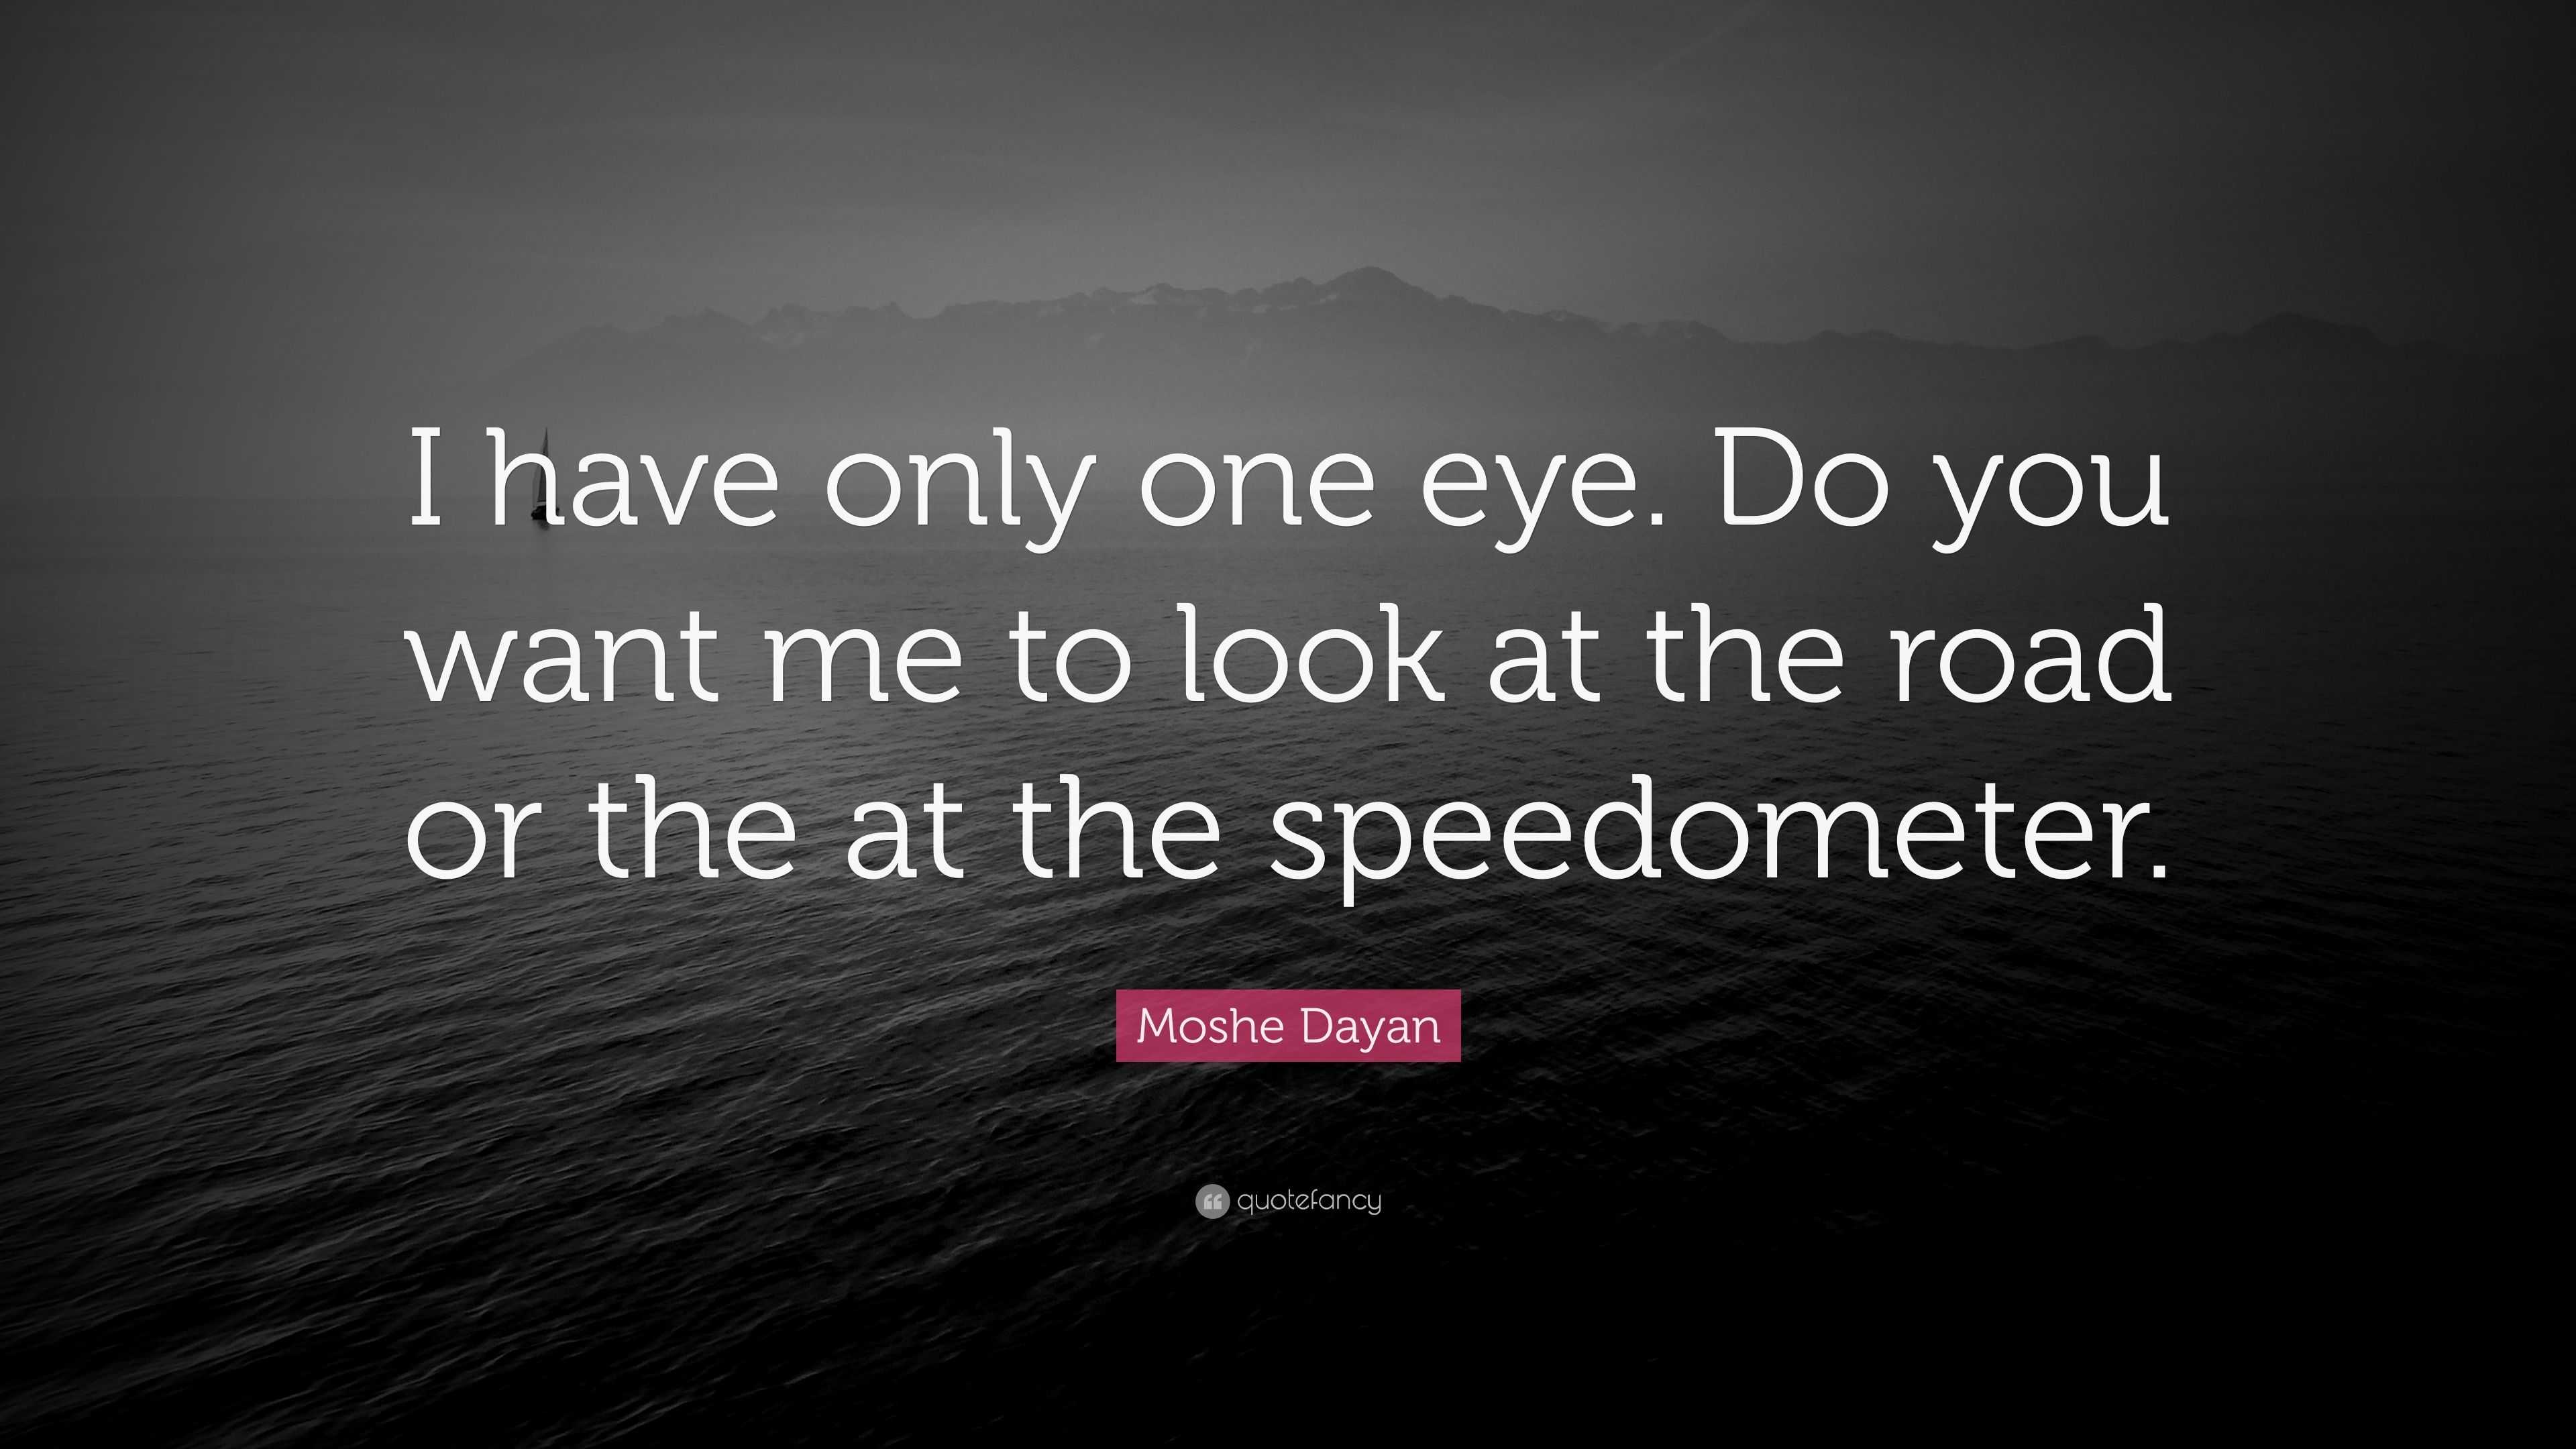 Moshe Dayan Quote: "I have only one eye. Do you want me to look at the road or the at the ...